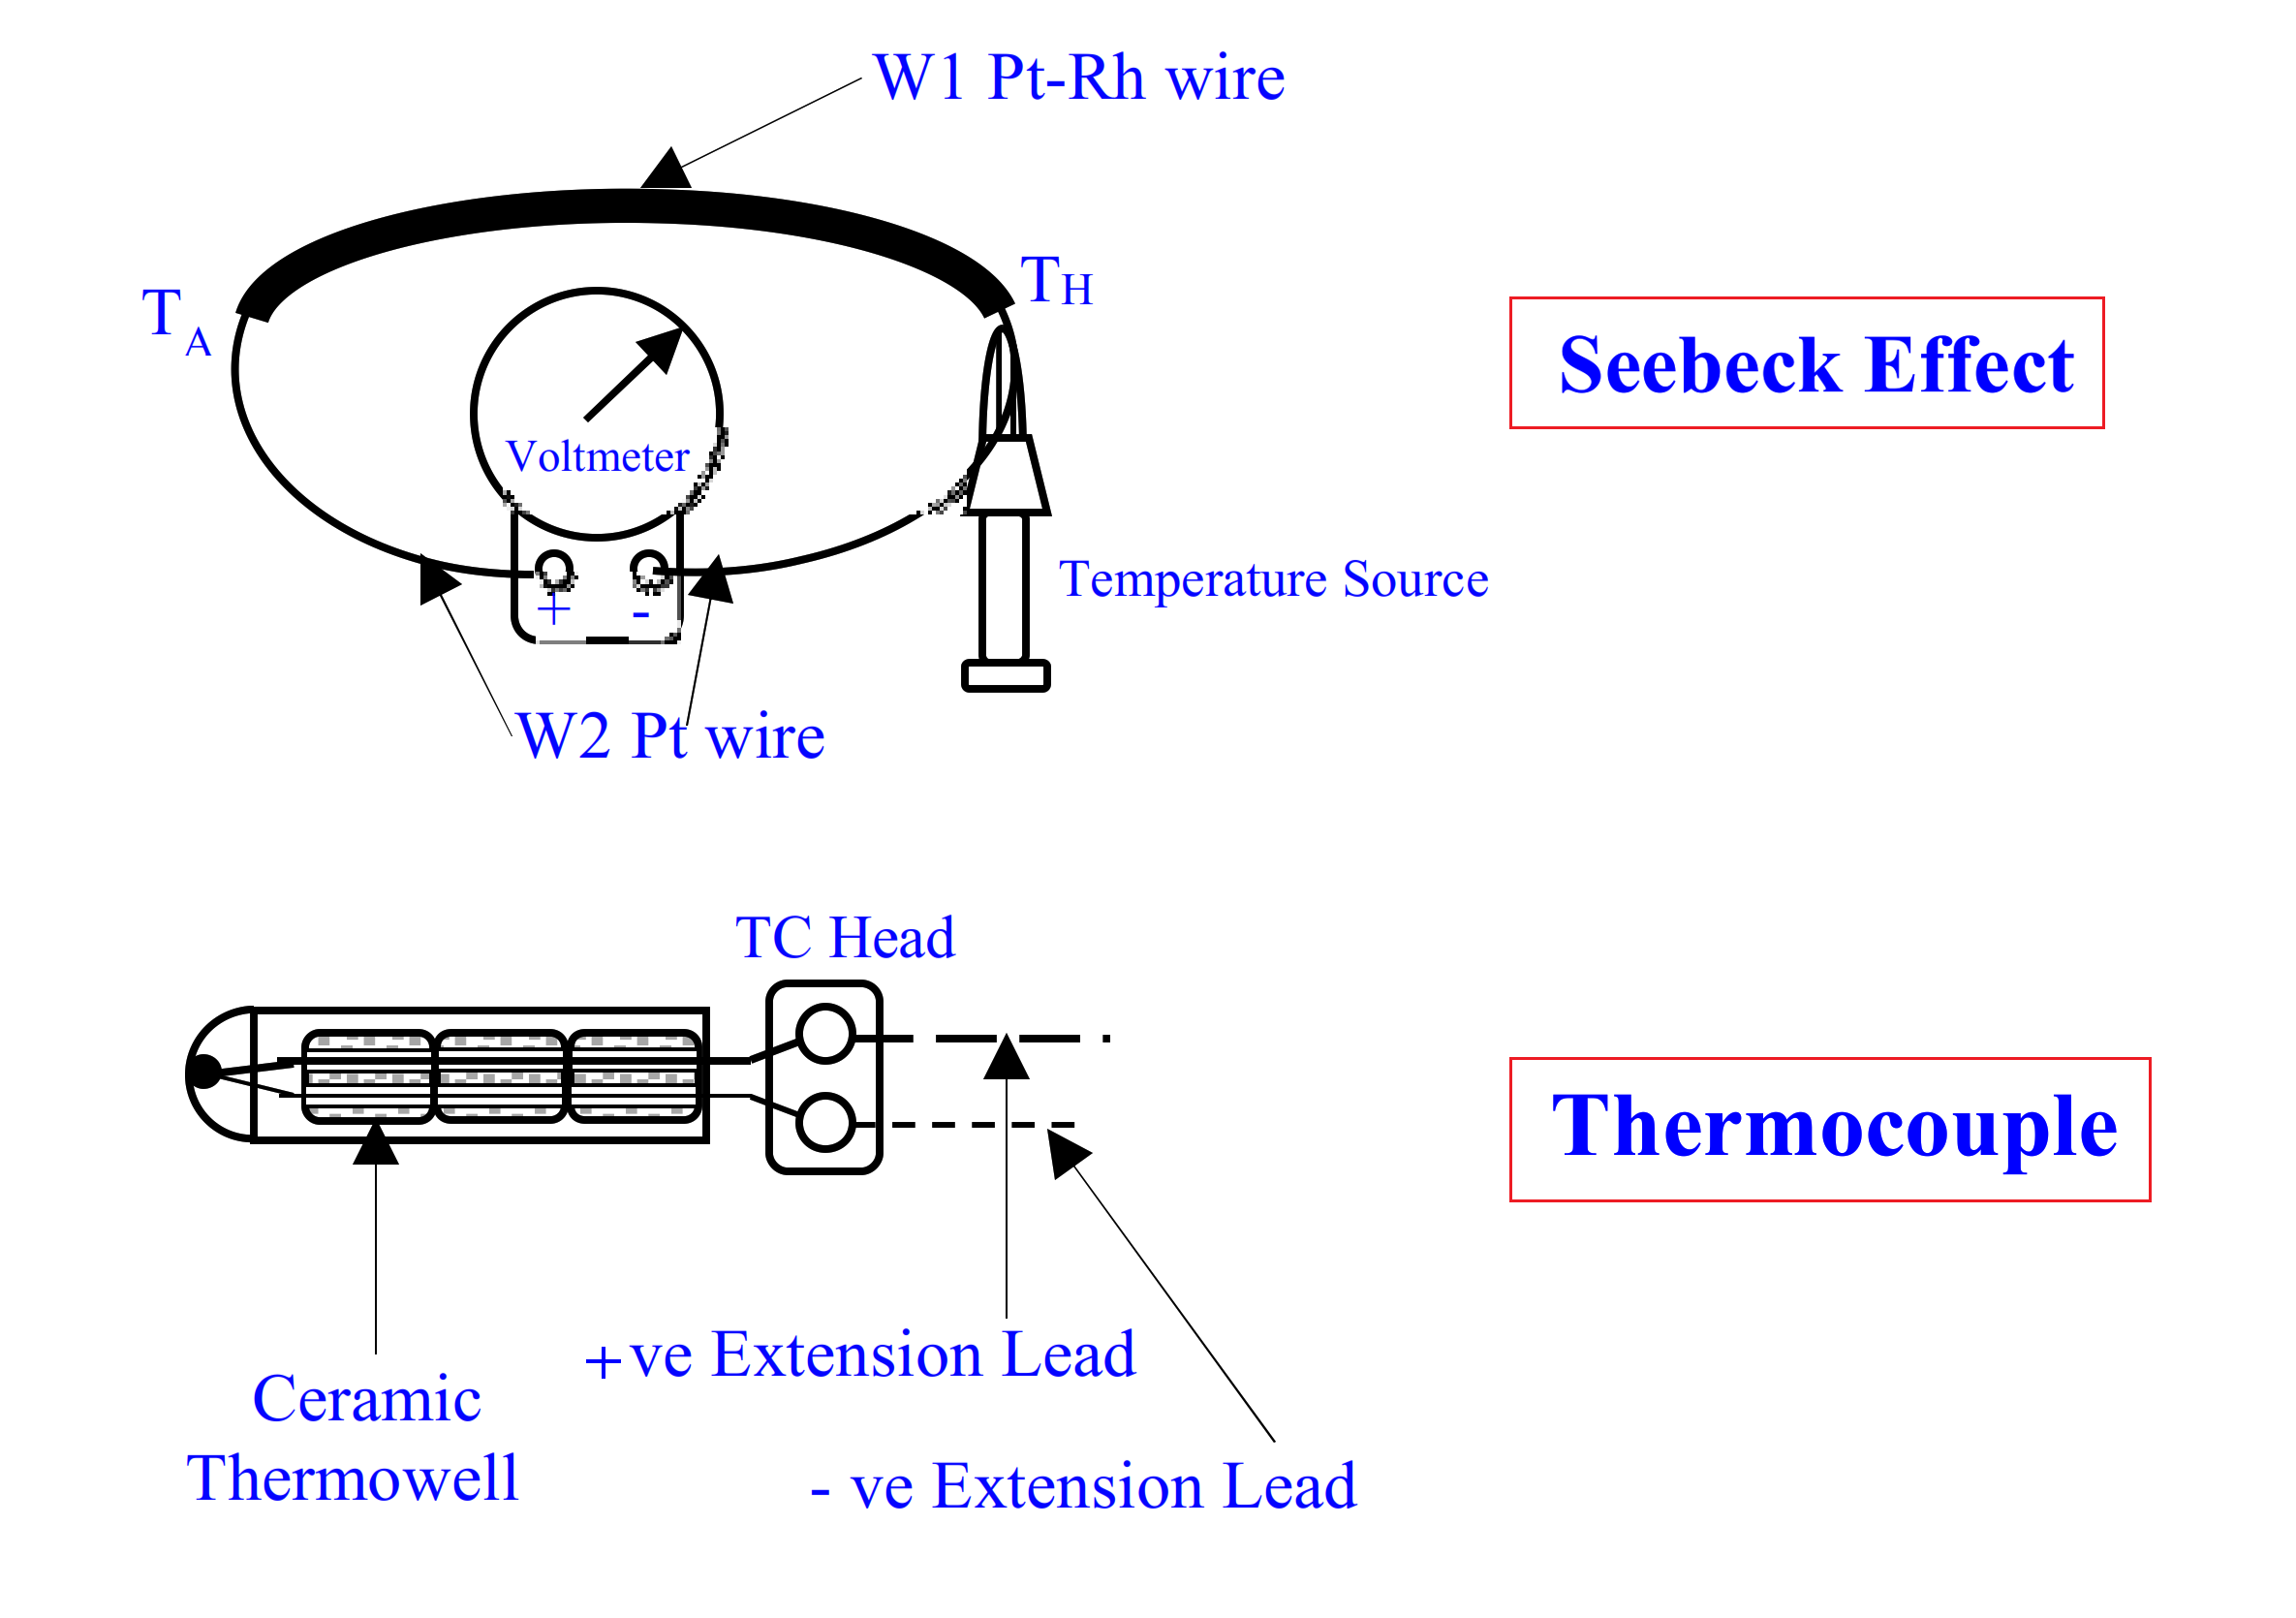 Thermocouple Seebeck Effect